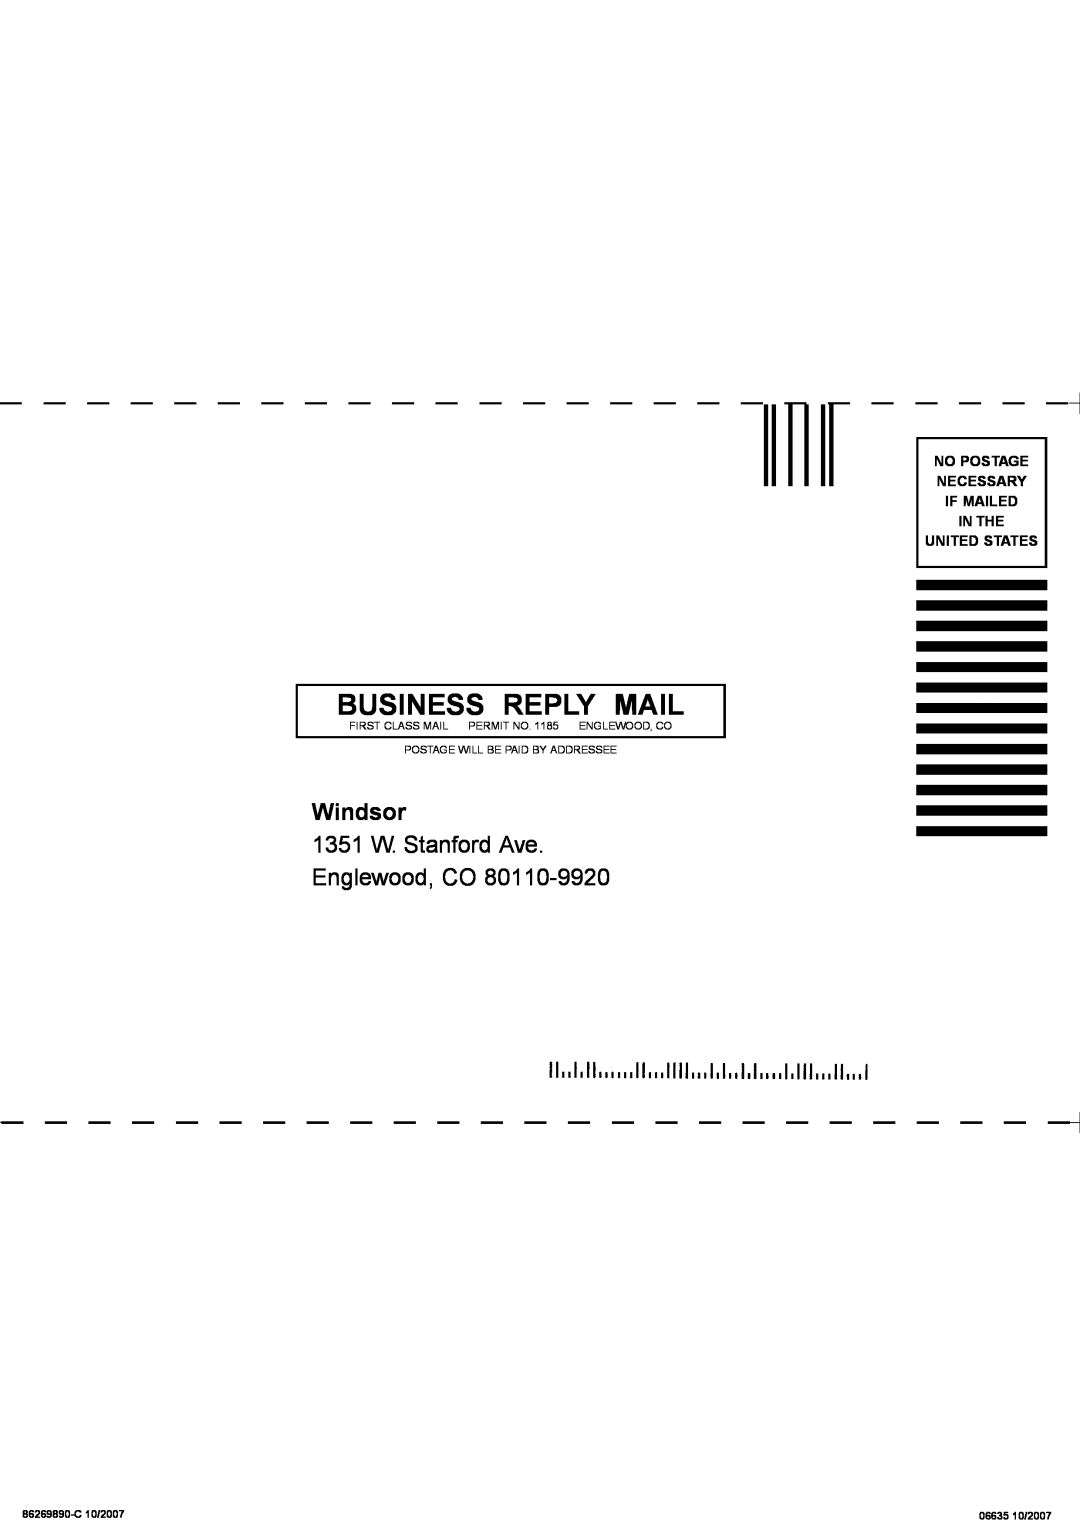 Windsor SRXP12 Business Reply Mail, Windsor, 1351 W. Stanford Ave Englewood, CO, No Postage Necessary If Mailed In The 